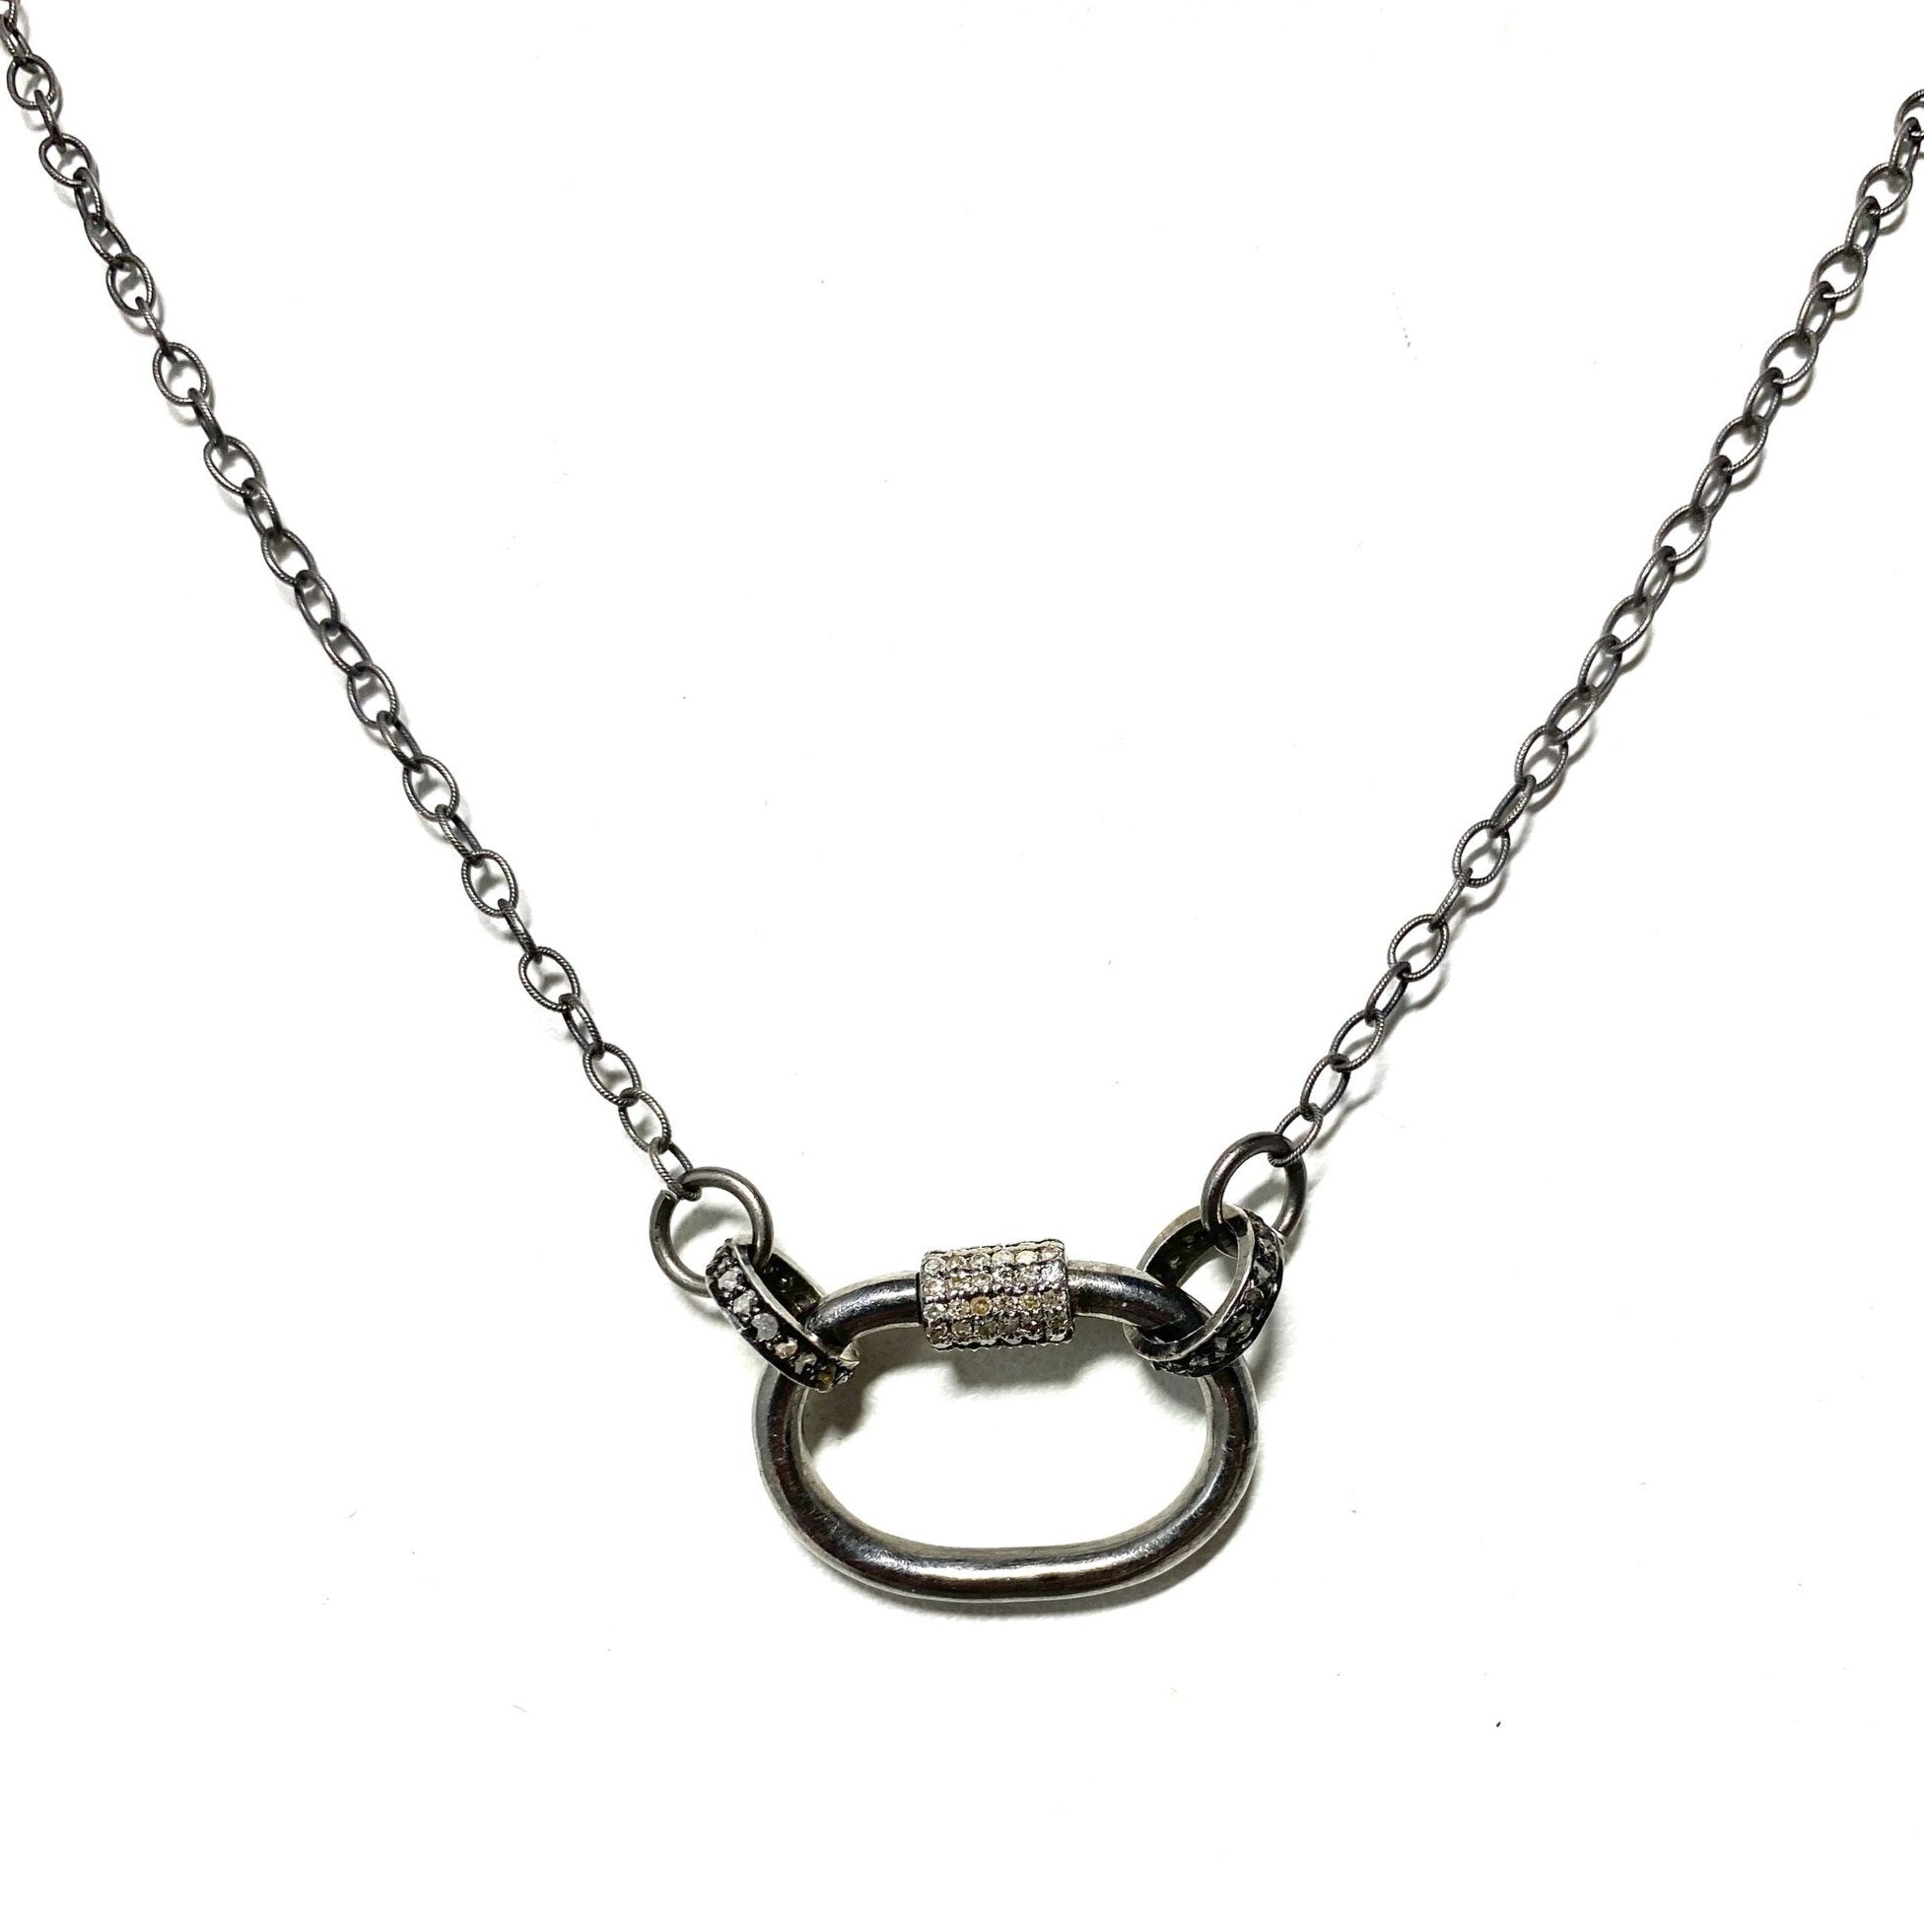 S.Row Designs Sterling Silver and Diamond Lock Necklace